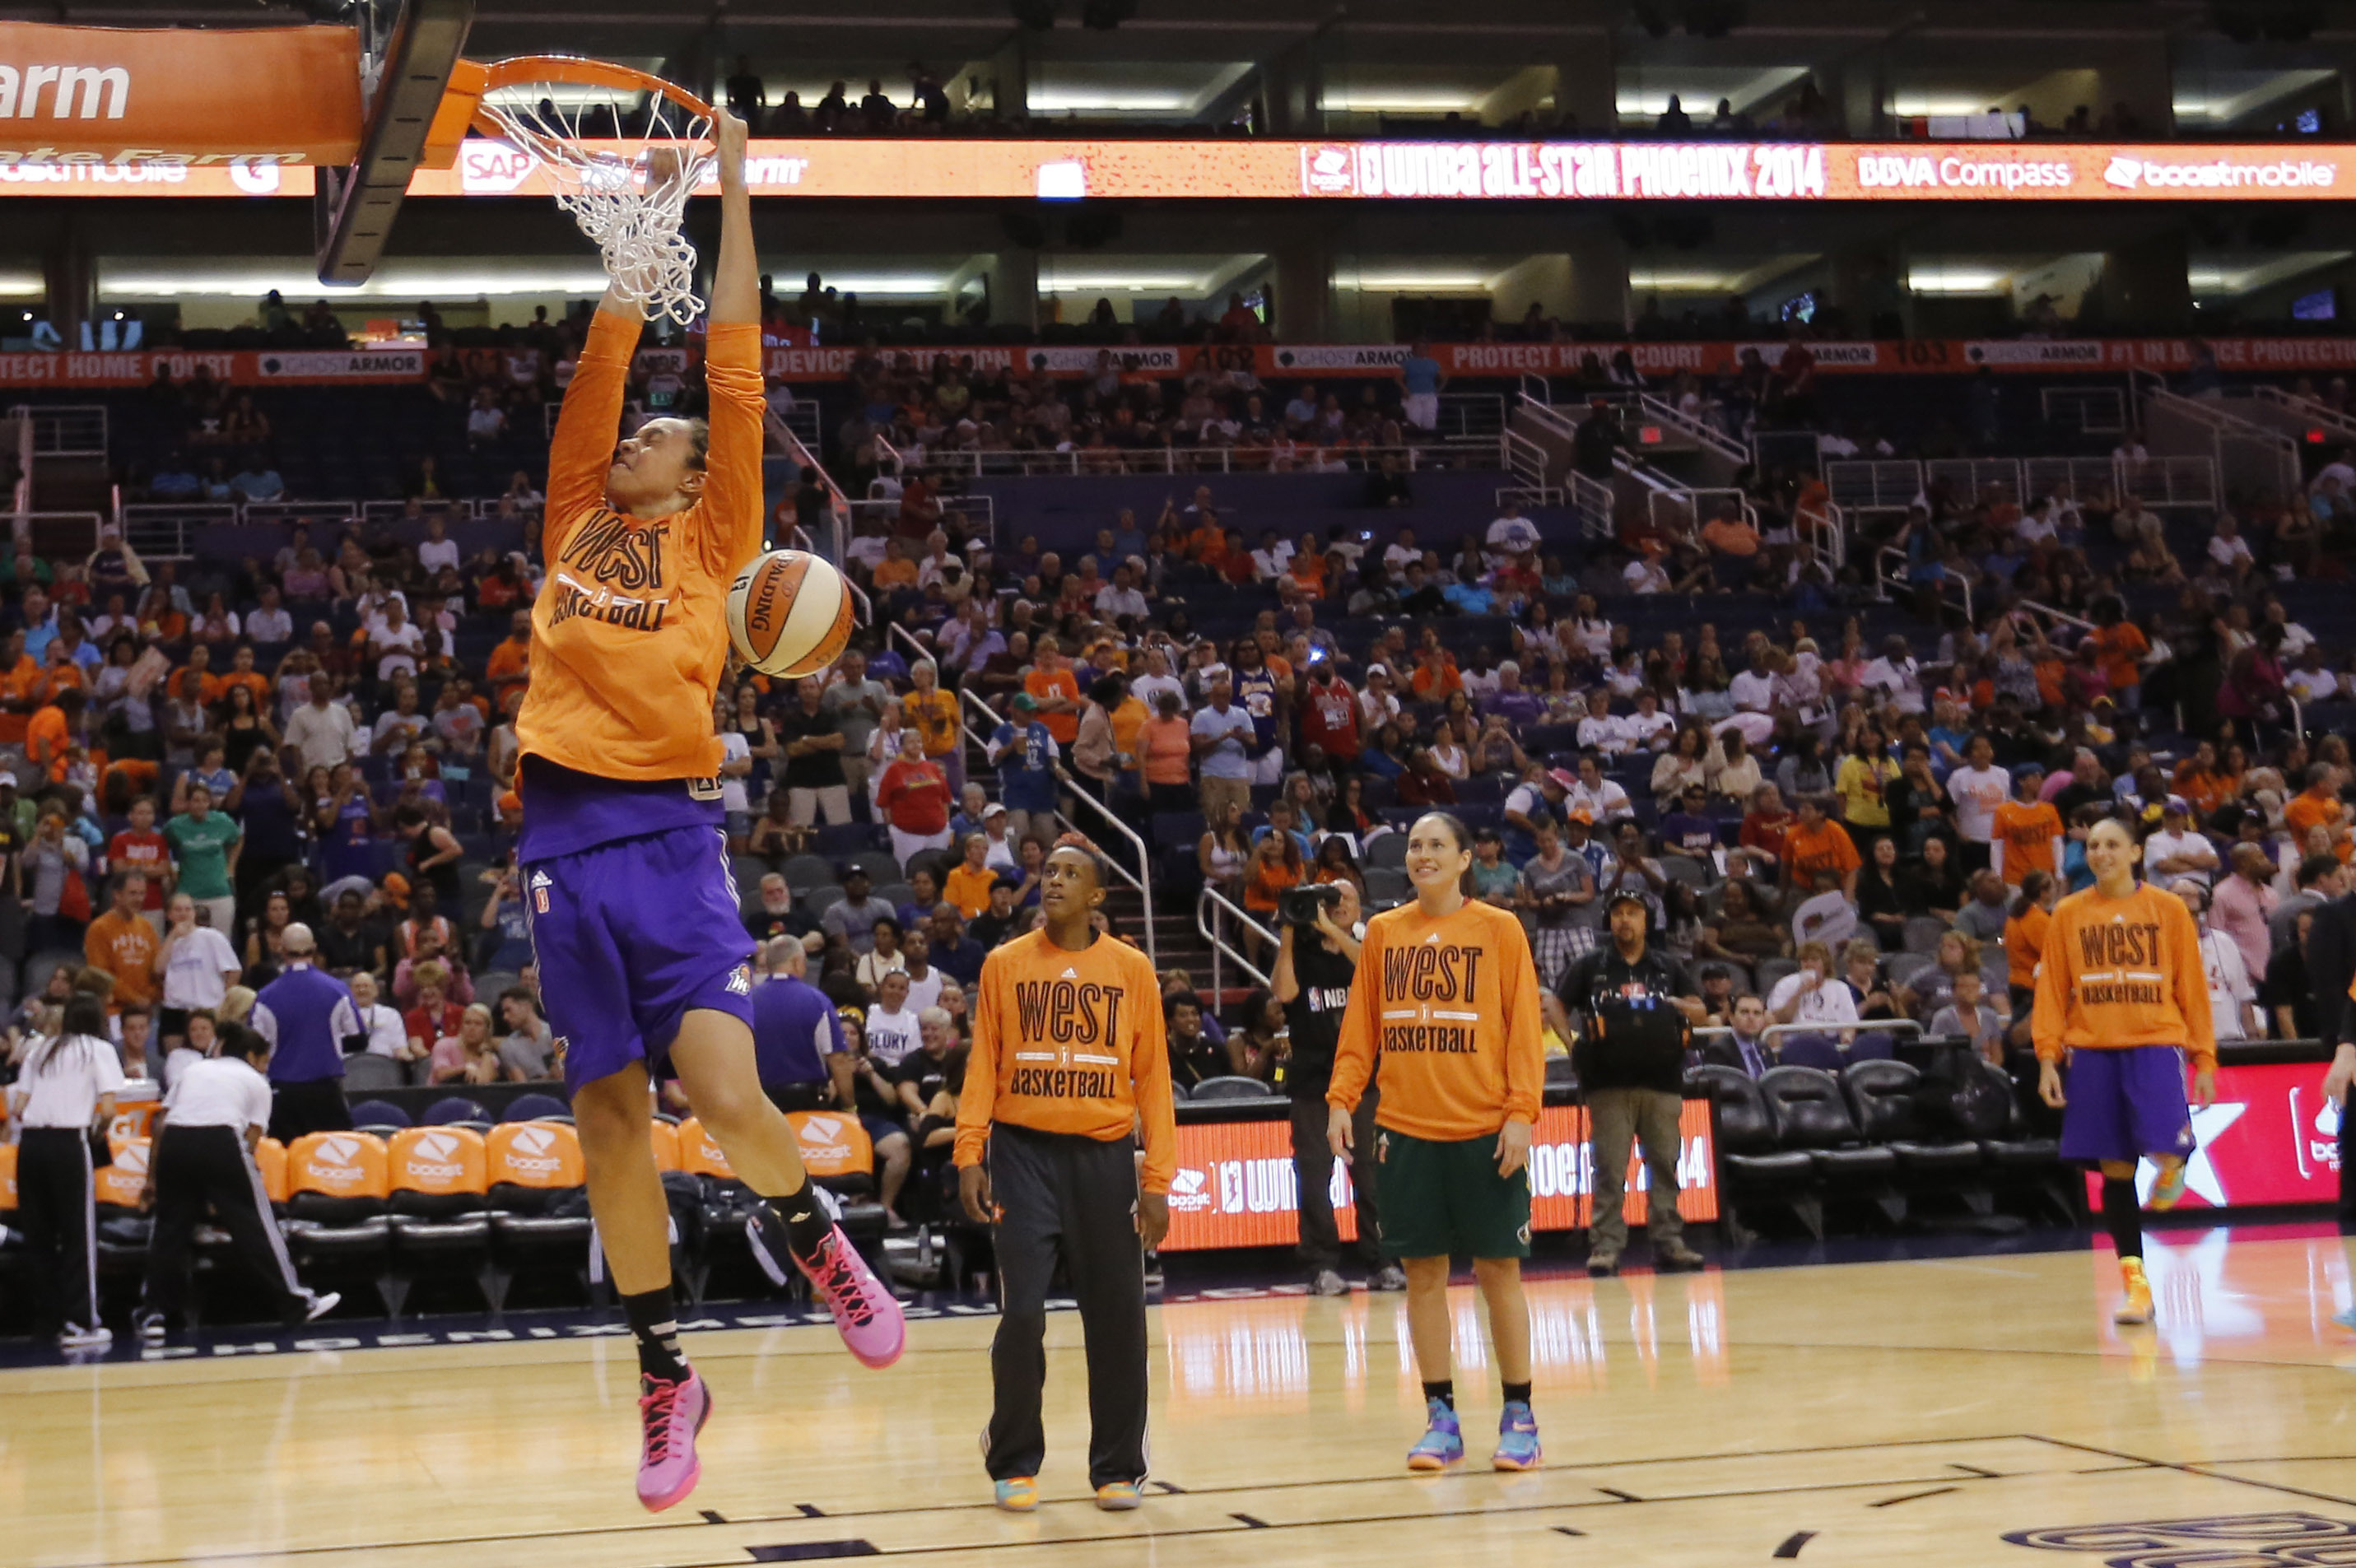 Brittney Griner dunk: Why are there so few jams in women's basketball?